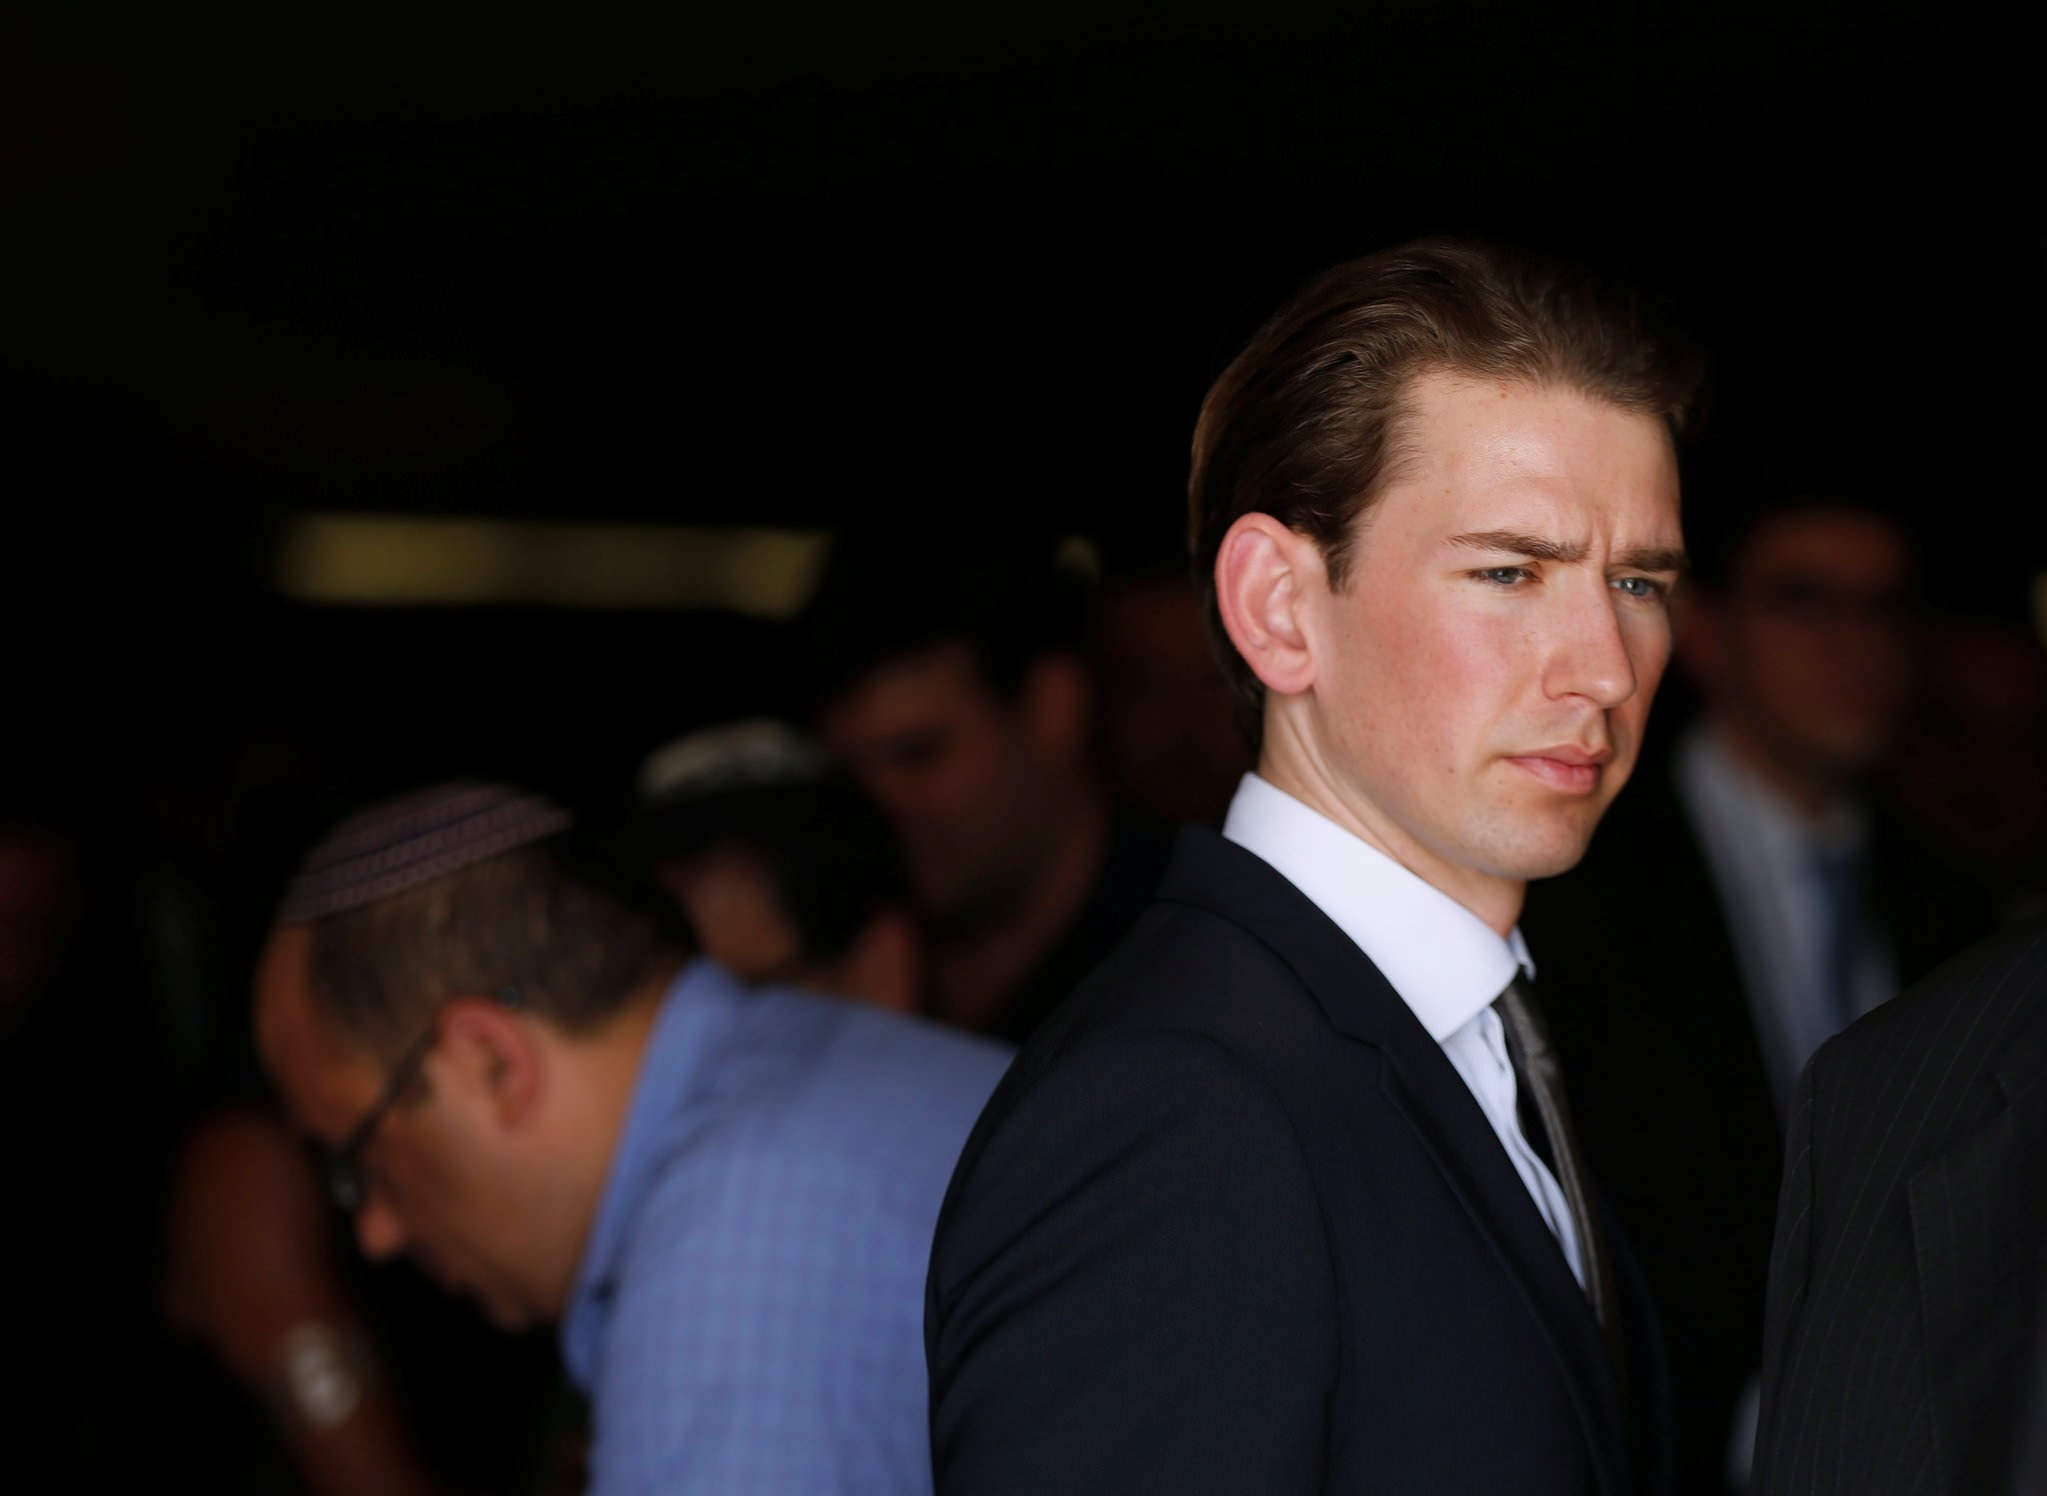 Austrian Foreign Minister Sebastian Kurz leaves after a ceremony in the Hall of Remembrance at Yad Vashem Holocaust Memorial in Jerusalem May 16, 2016. (REUTERS PHOTO)